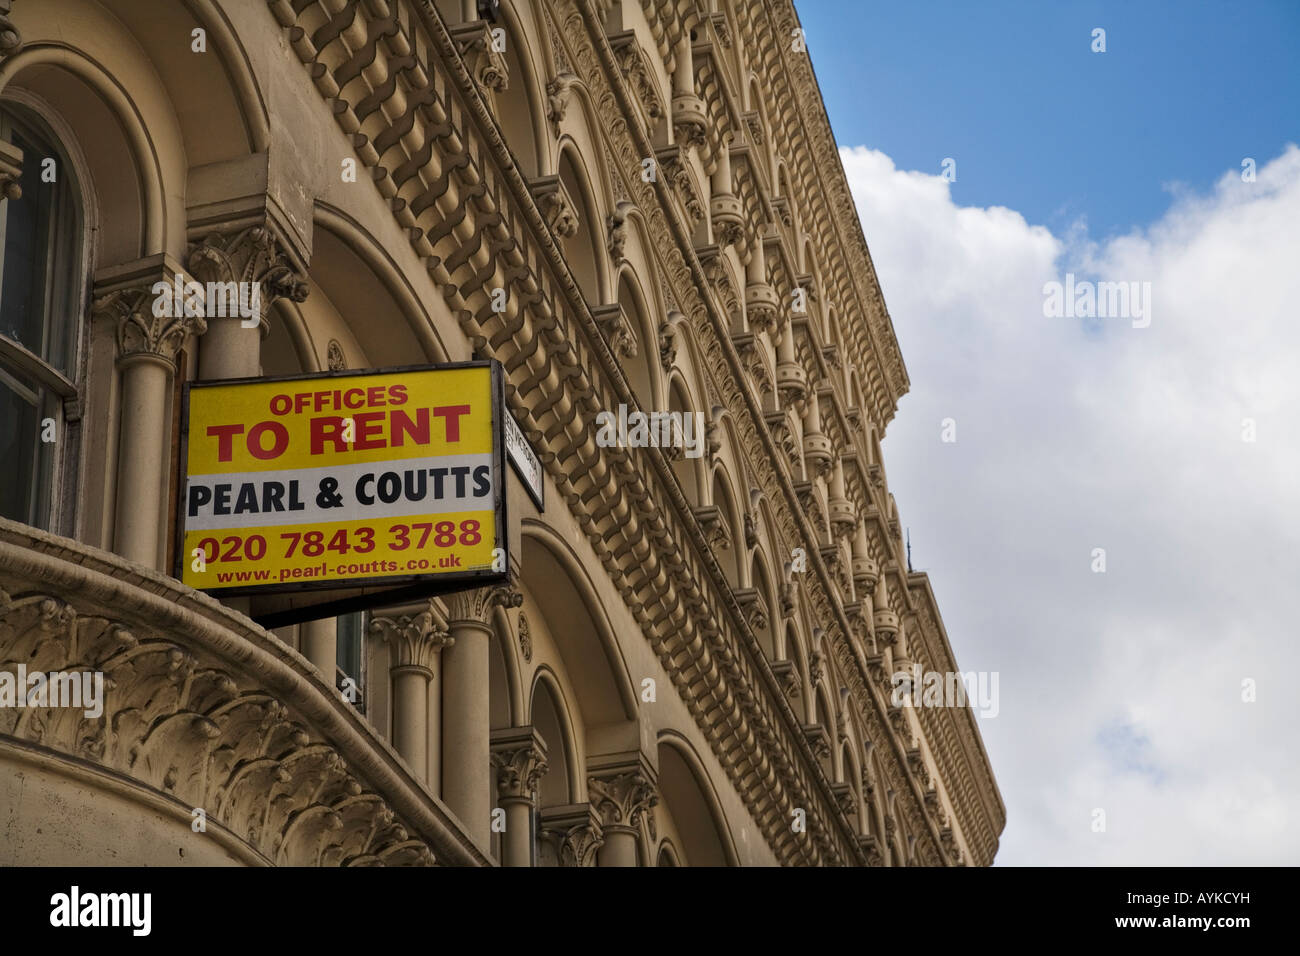 Offices to rent sign hanging off side of building in London Stock Photo